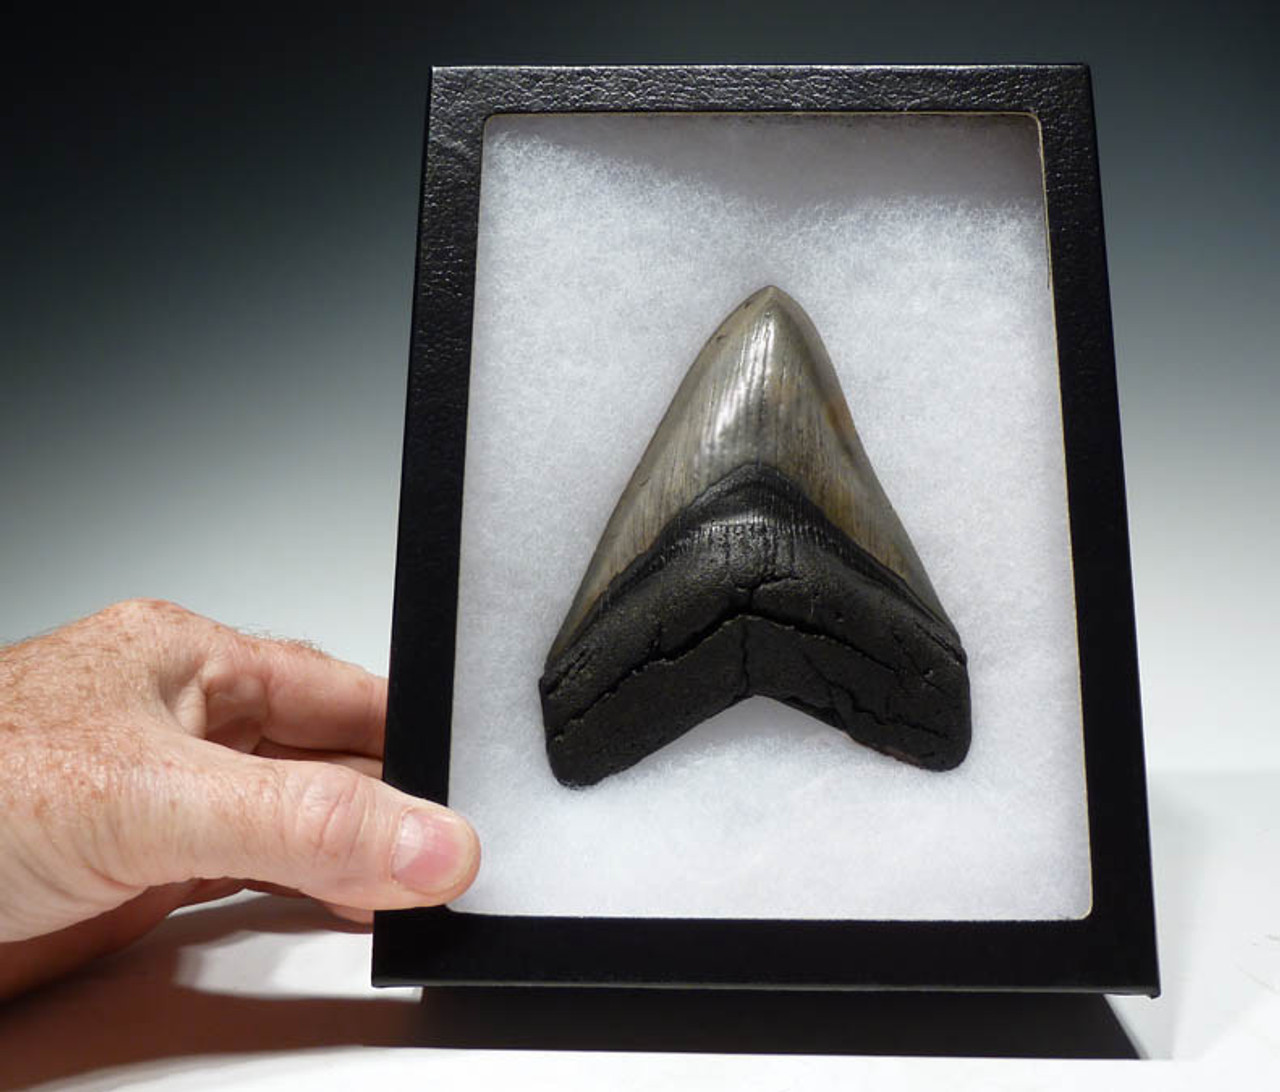 SH6-198 - COLLECTOR GRADE 5.25 INCH MEGALODON SHARK FOSSIL TOOTH